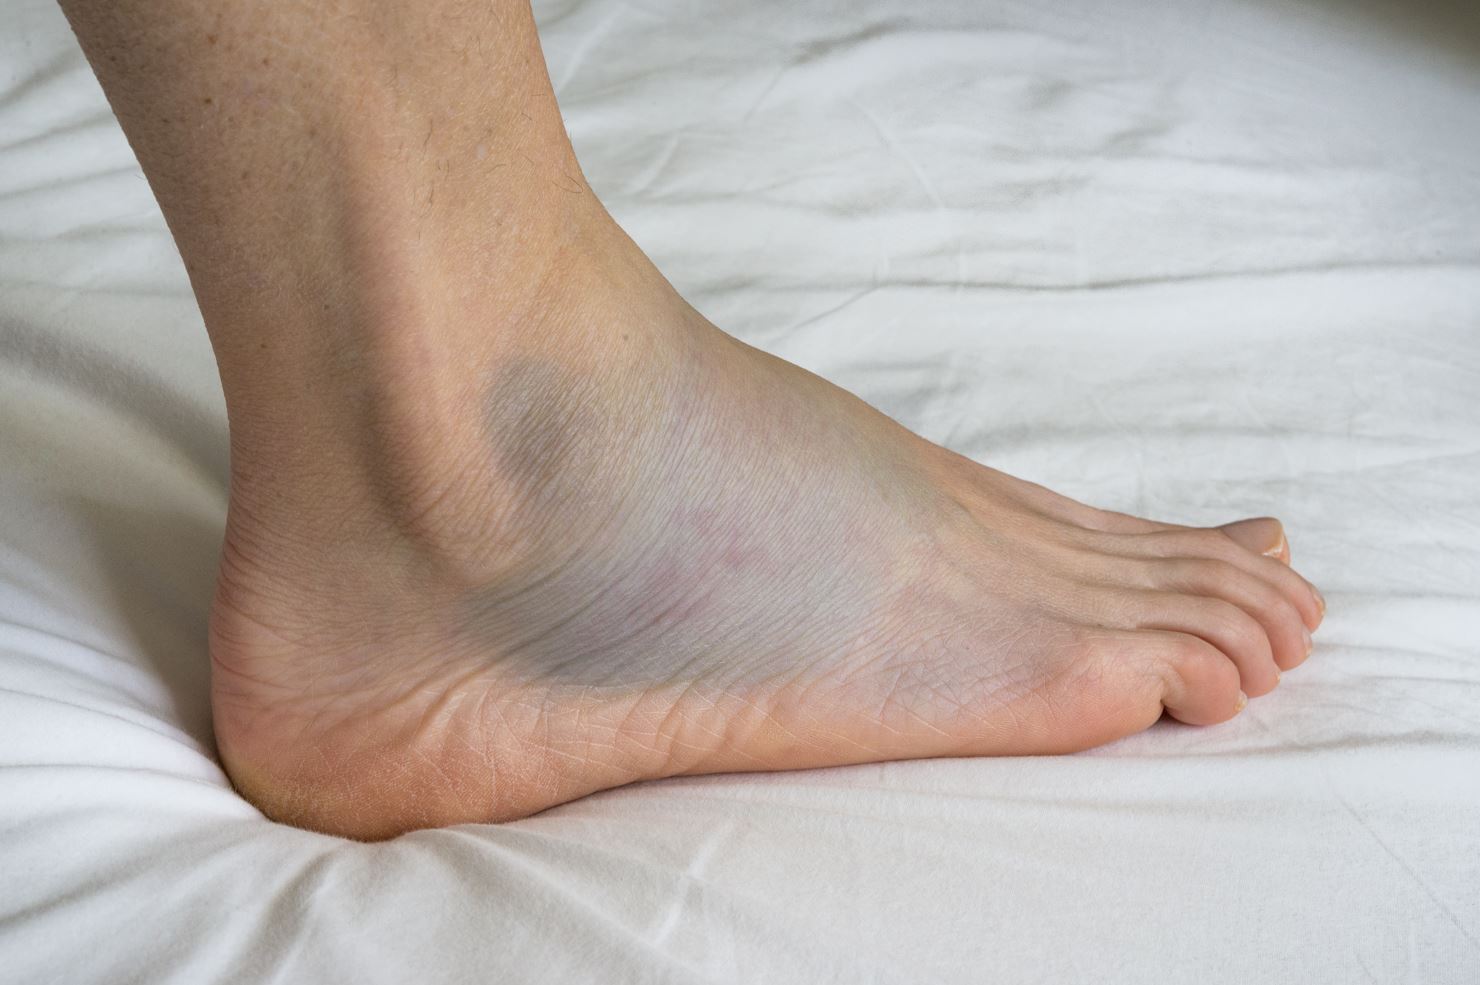 Ankle sprain is a common foot injury. Straits Podiatry Singapore